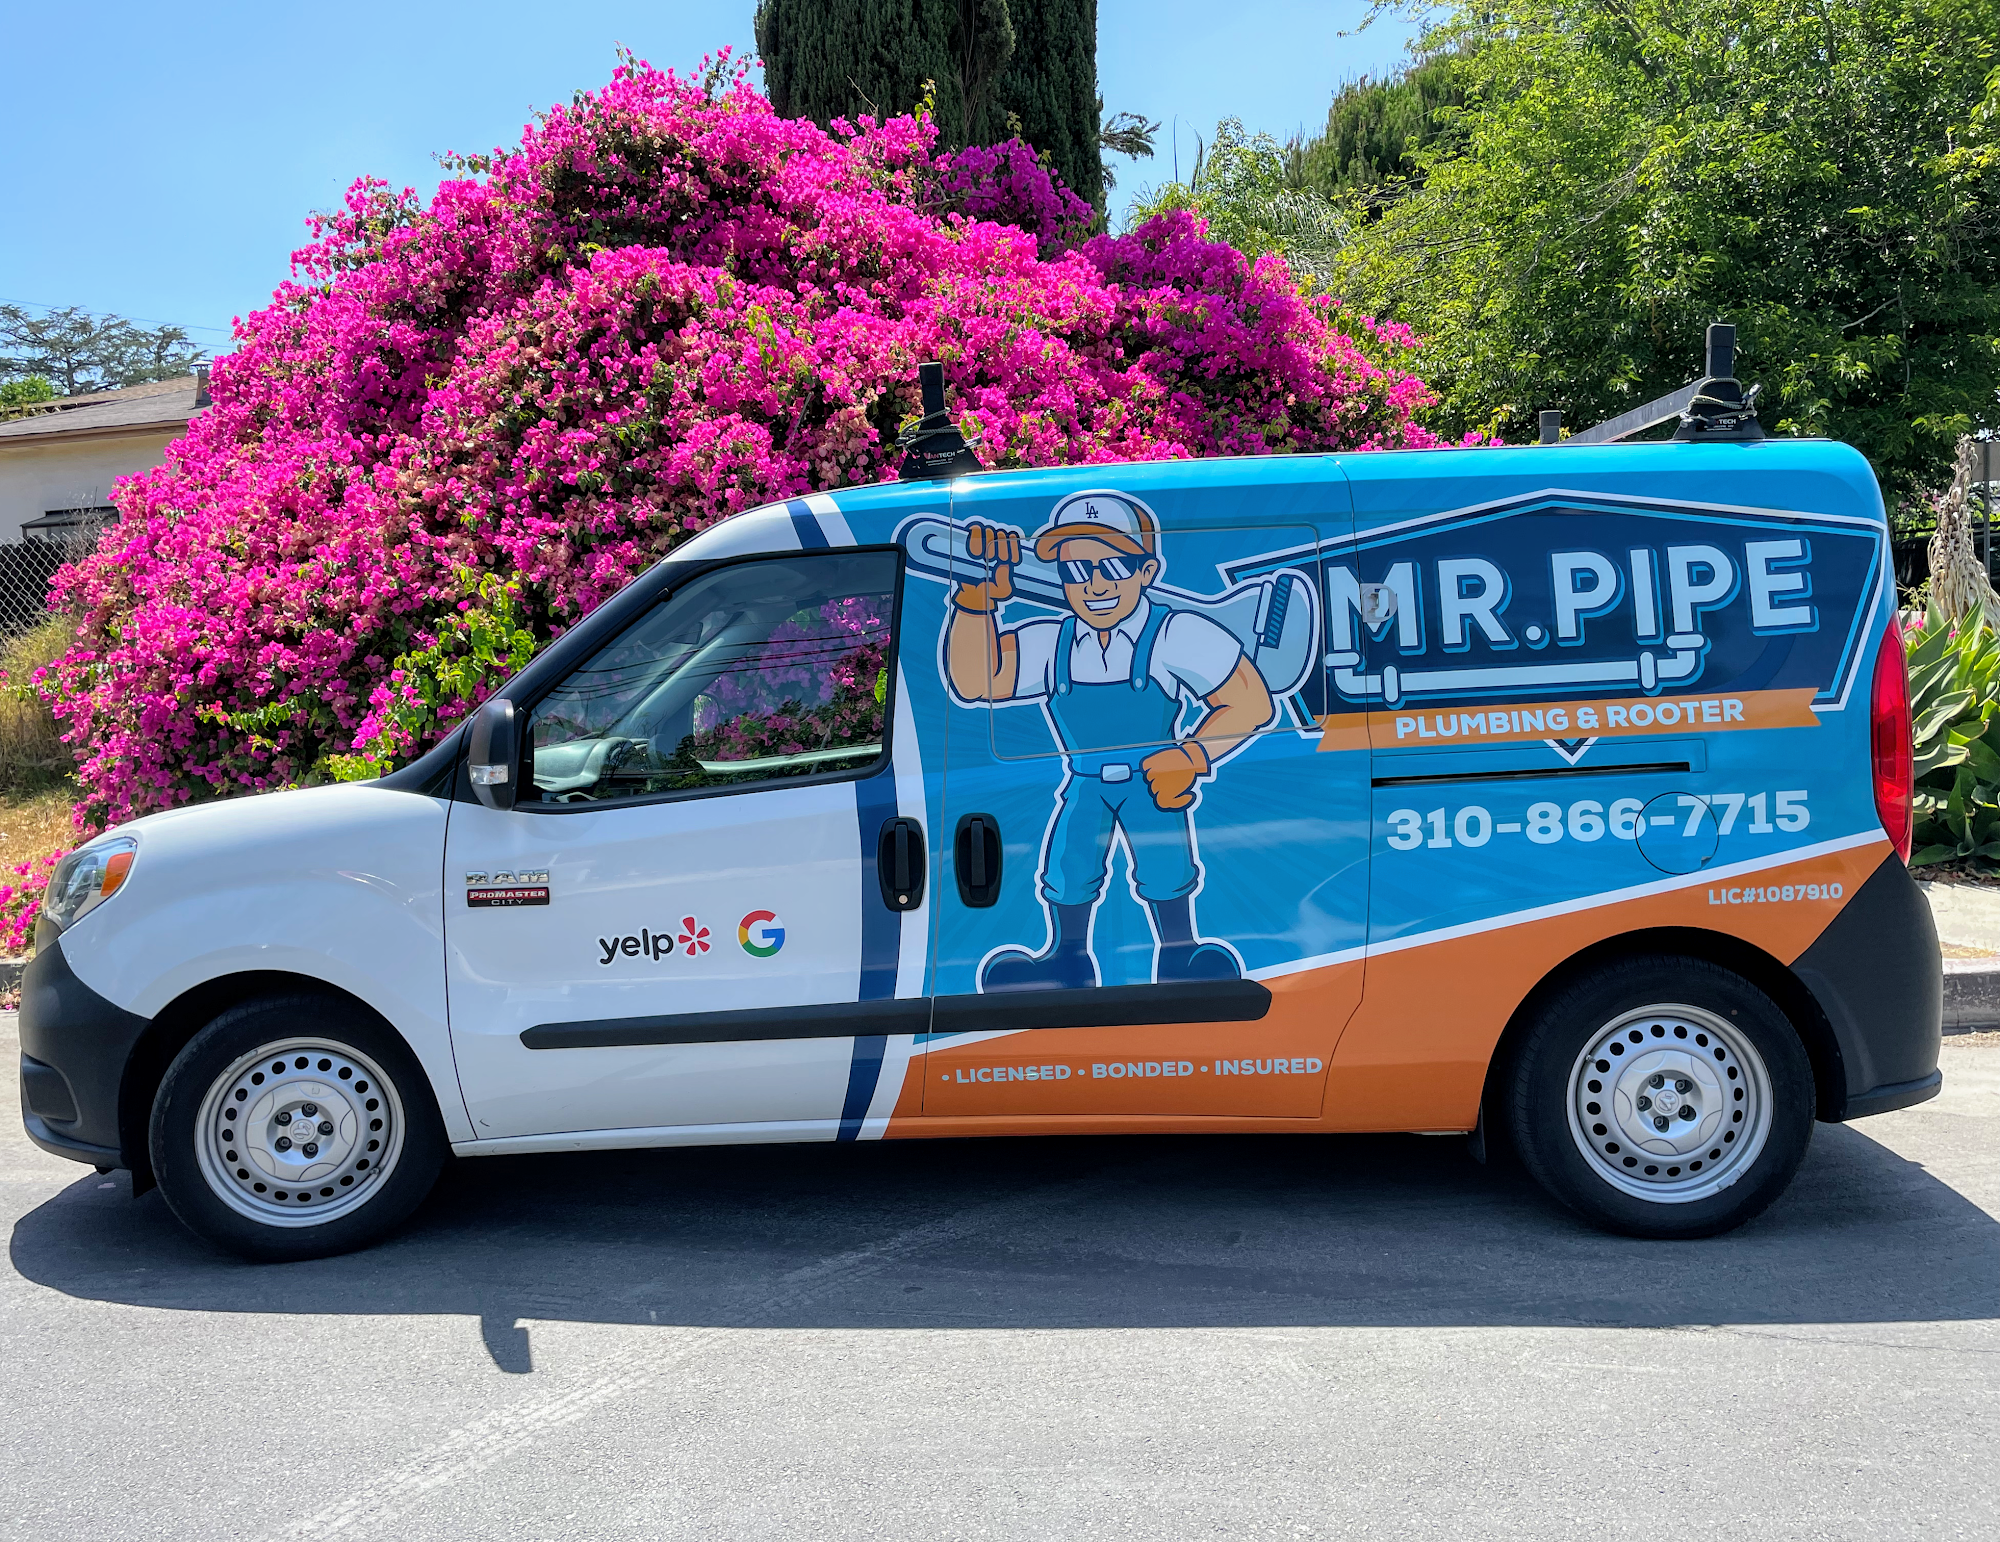 Mr. Pipe Plumbing and Rooter